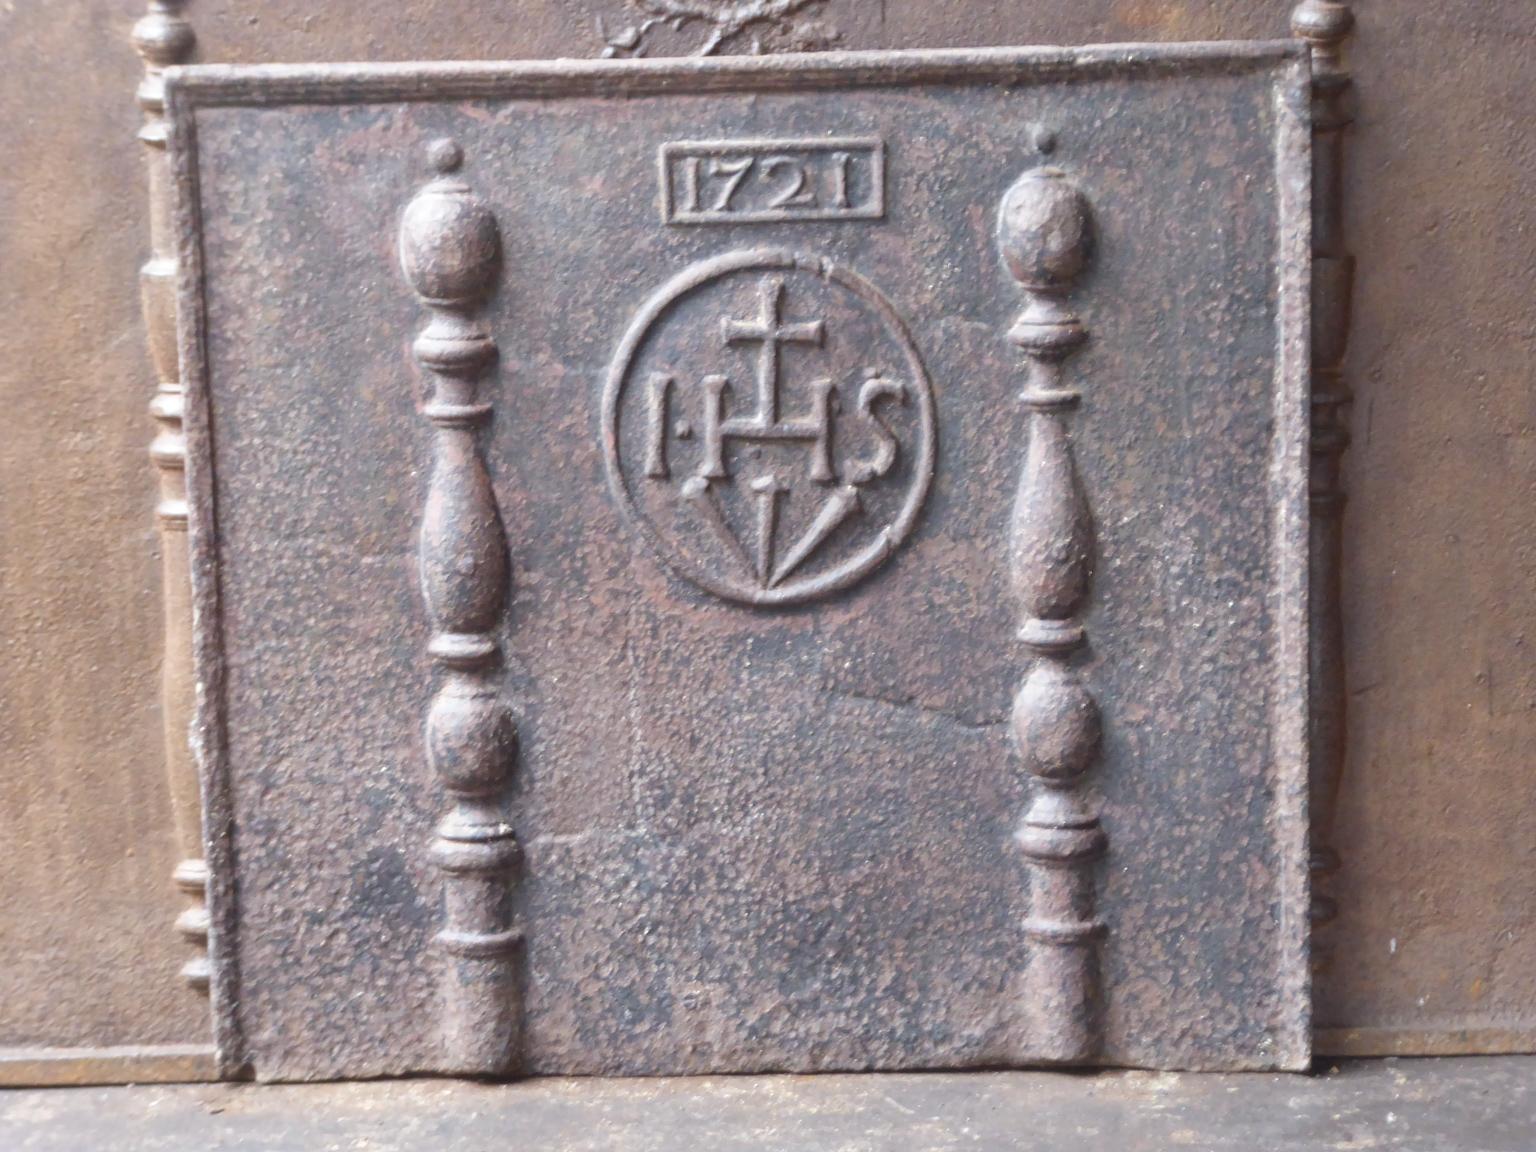 18th century French Louis XV fireback with two pillars, an IHS monogram, and the date of production 1721.

The monogram IHS stands for Iesus Hominum Salvator (Jesus the Savior of Humanity) or In Hoc Signo (In this sign will you win). The pillars